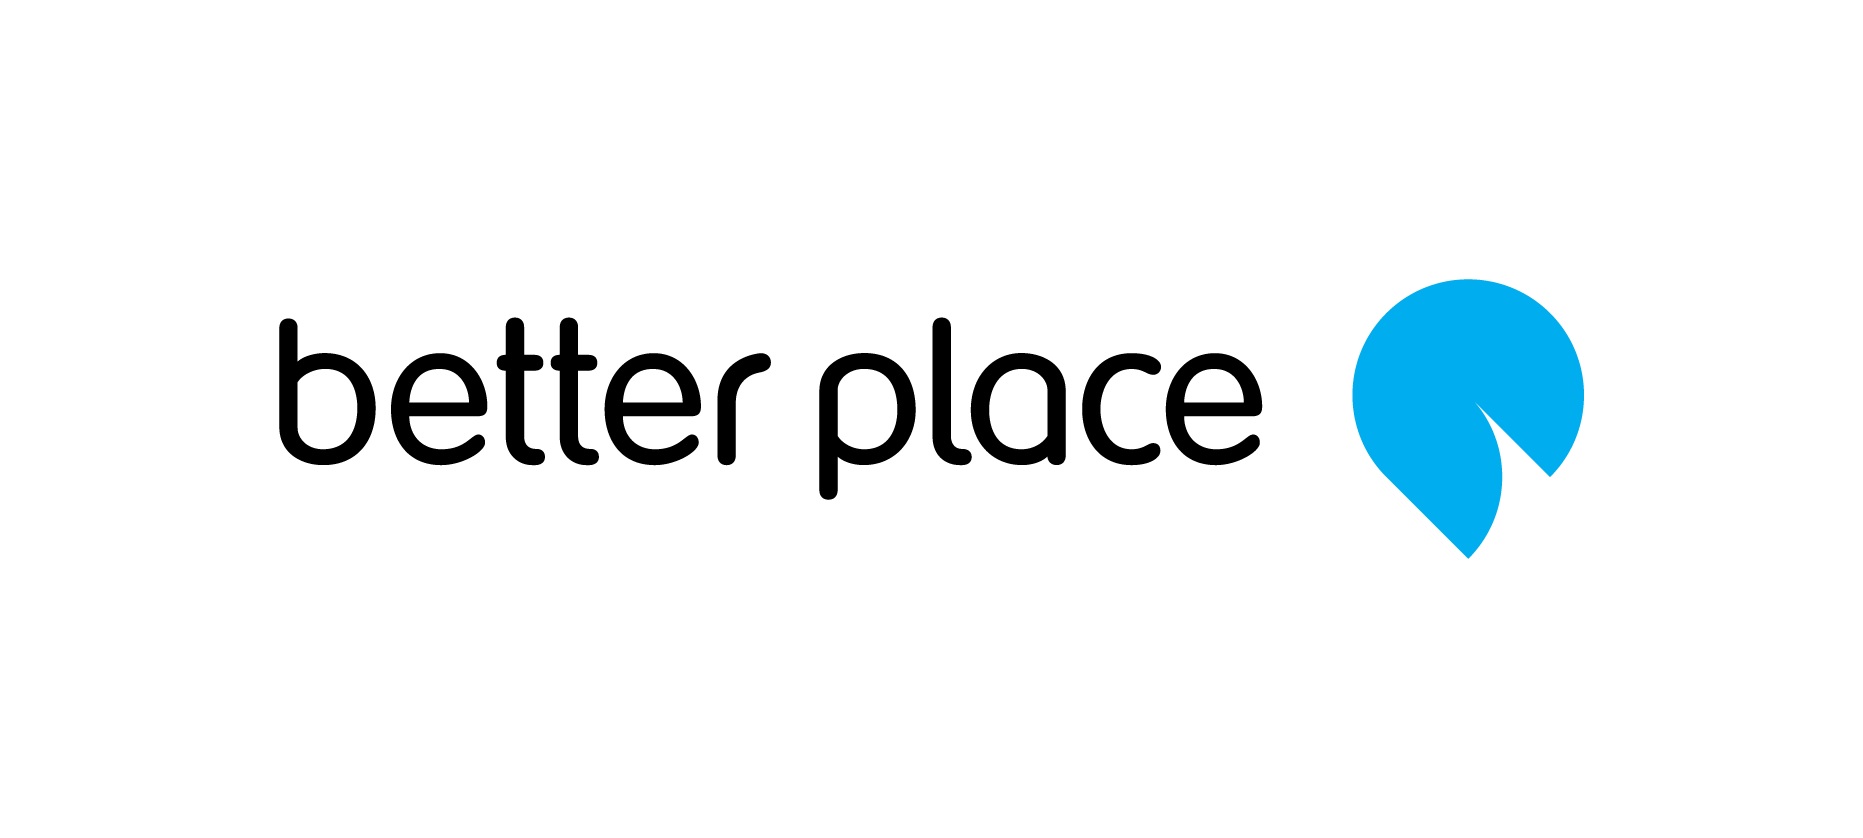 better place lab twitter sign